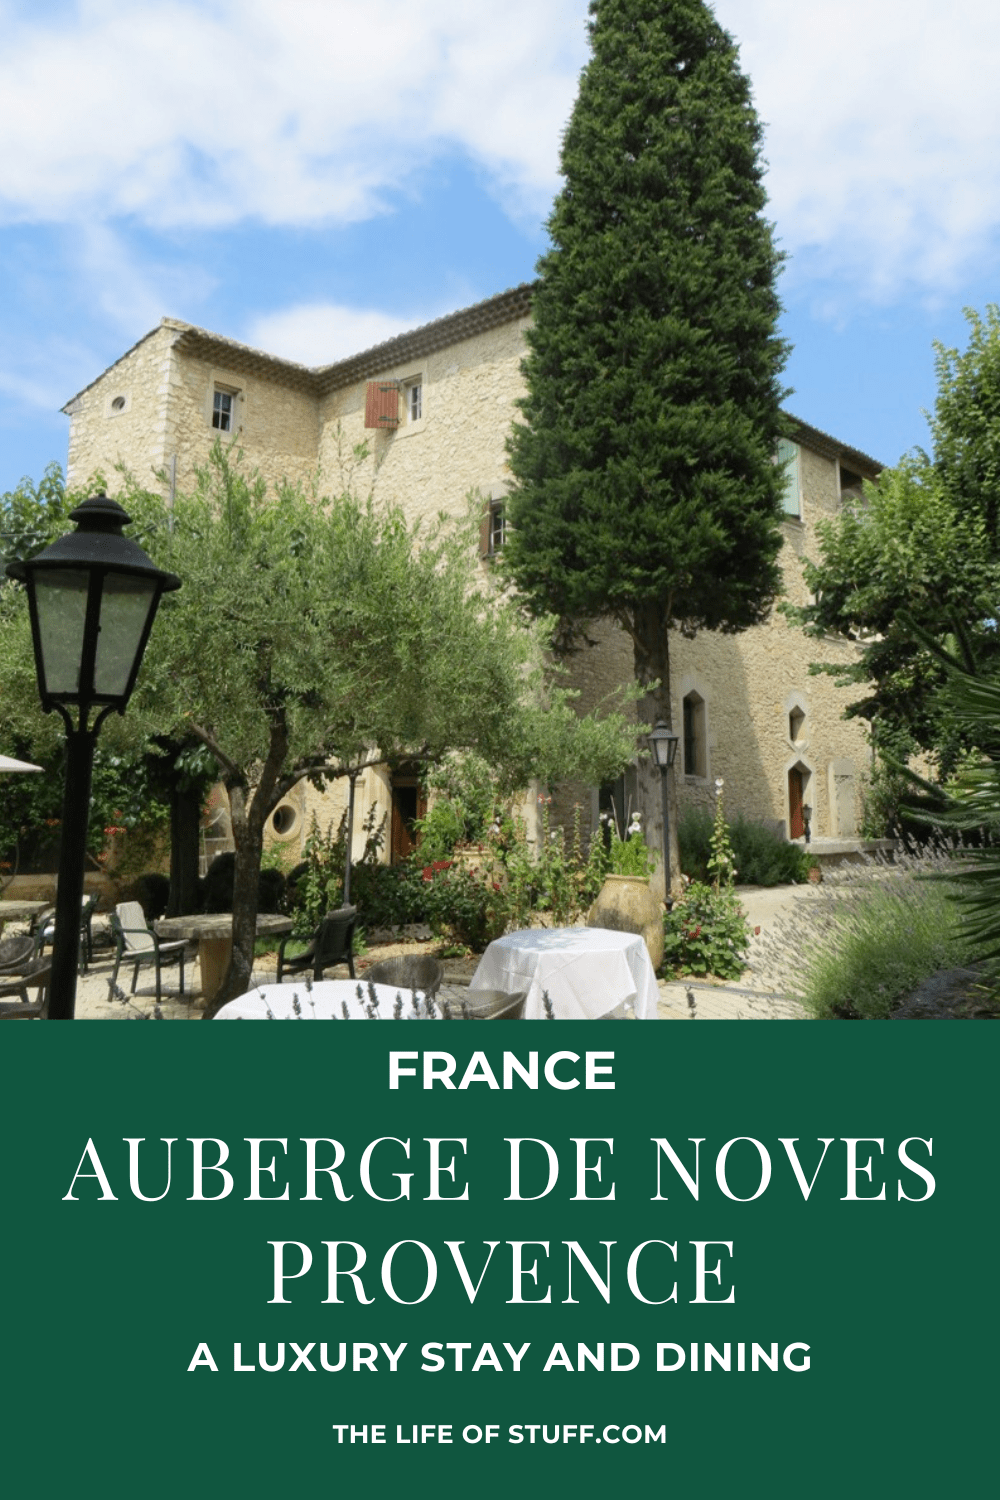 Luxury Stay and Dining at Auberge de Noves Provence, France - The Life of Stuff